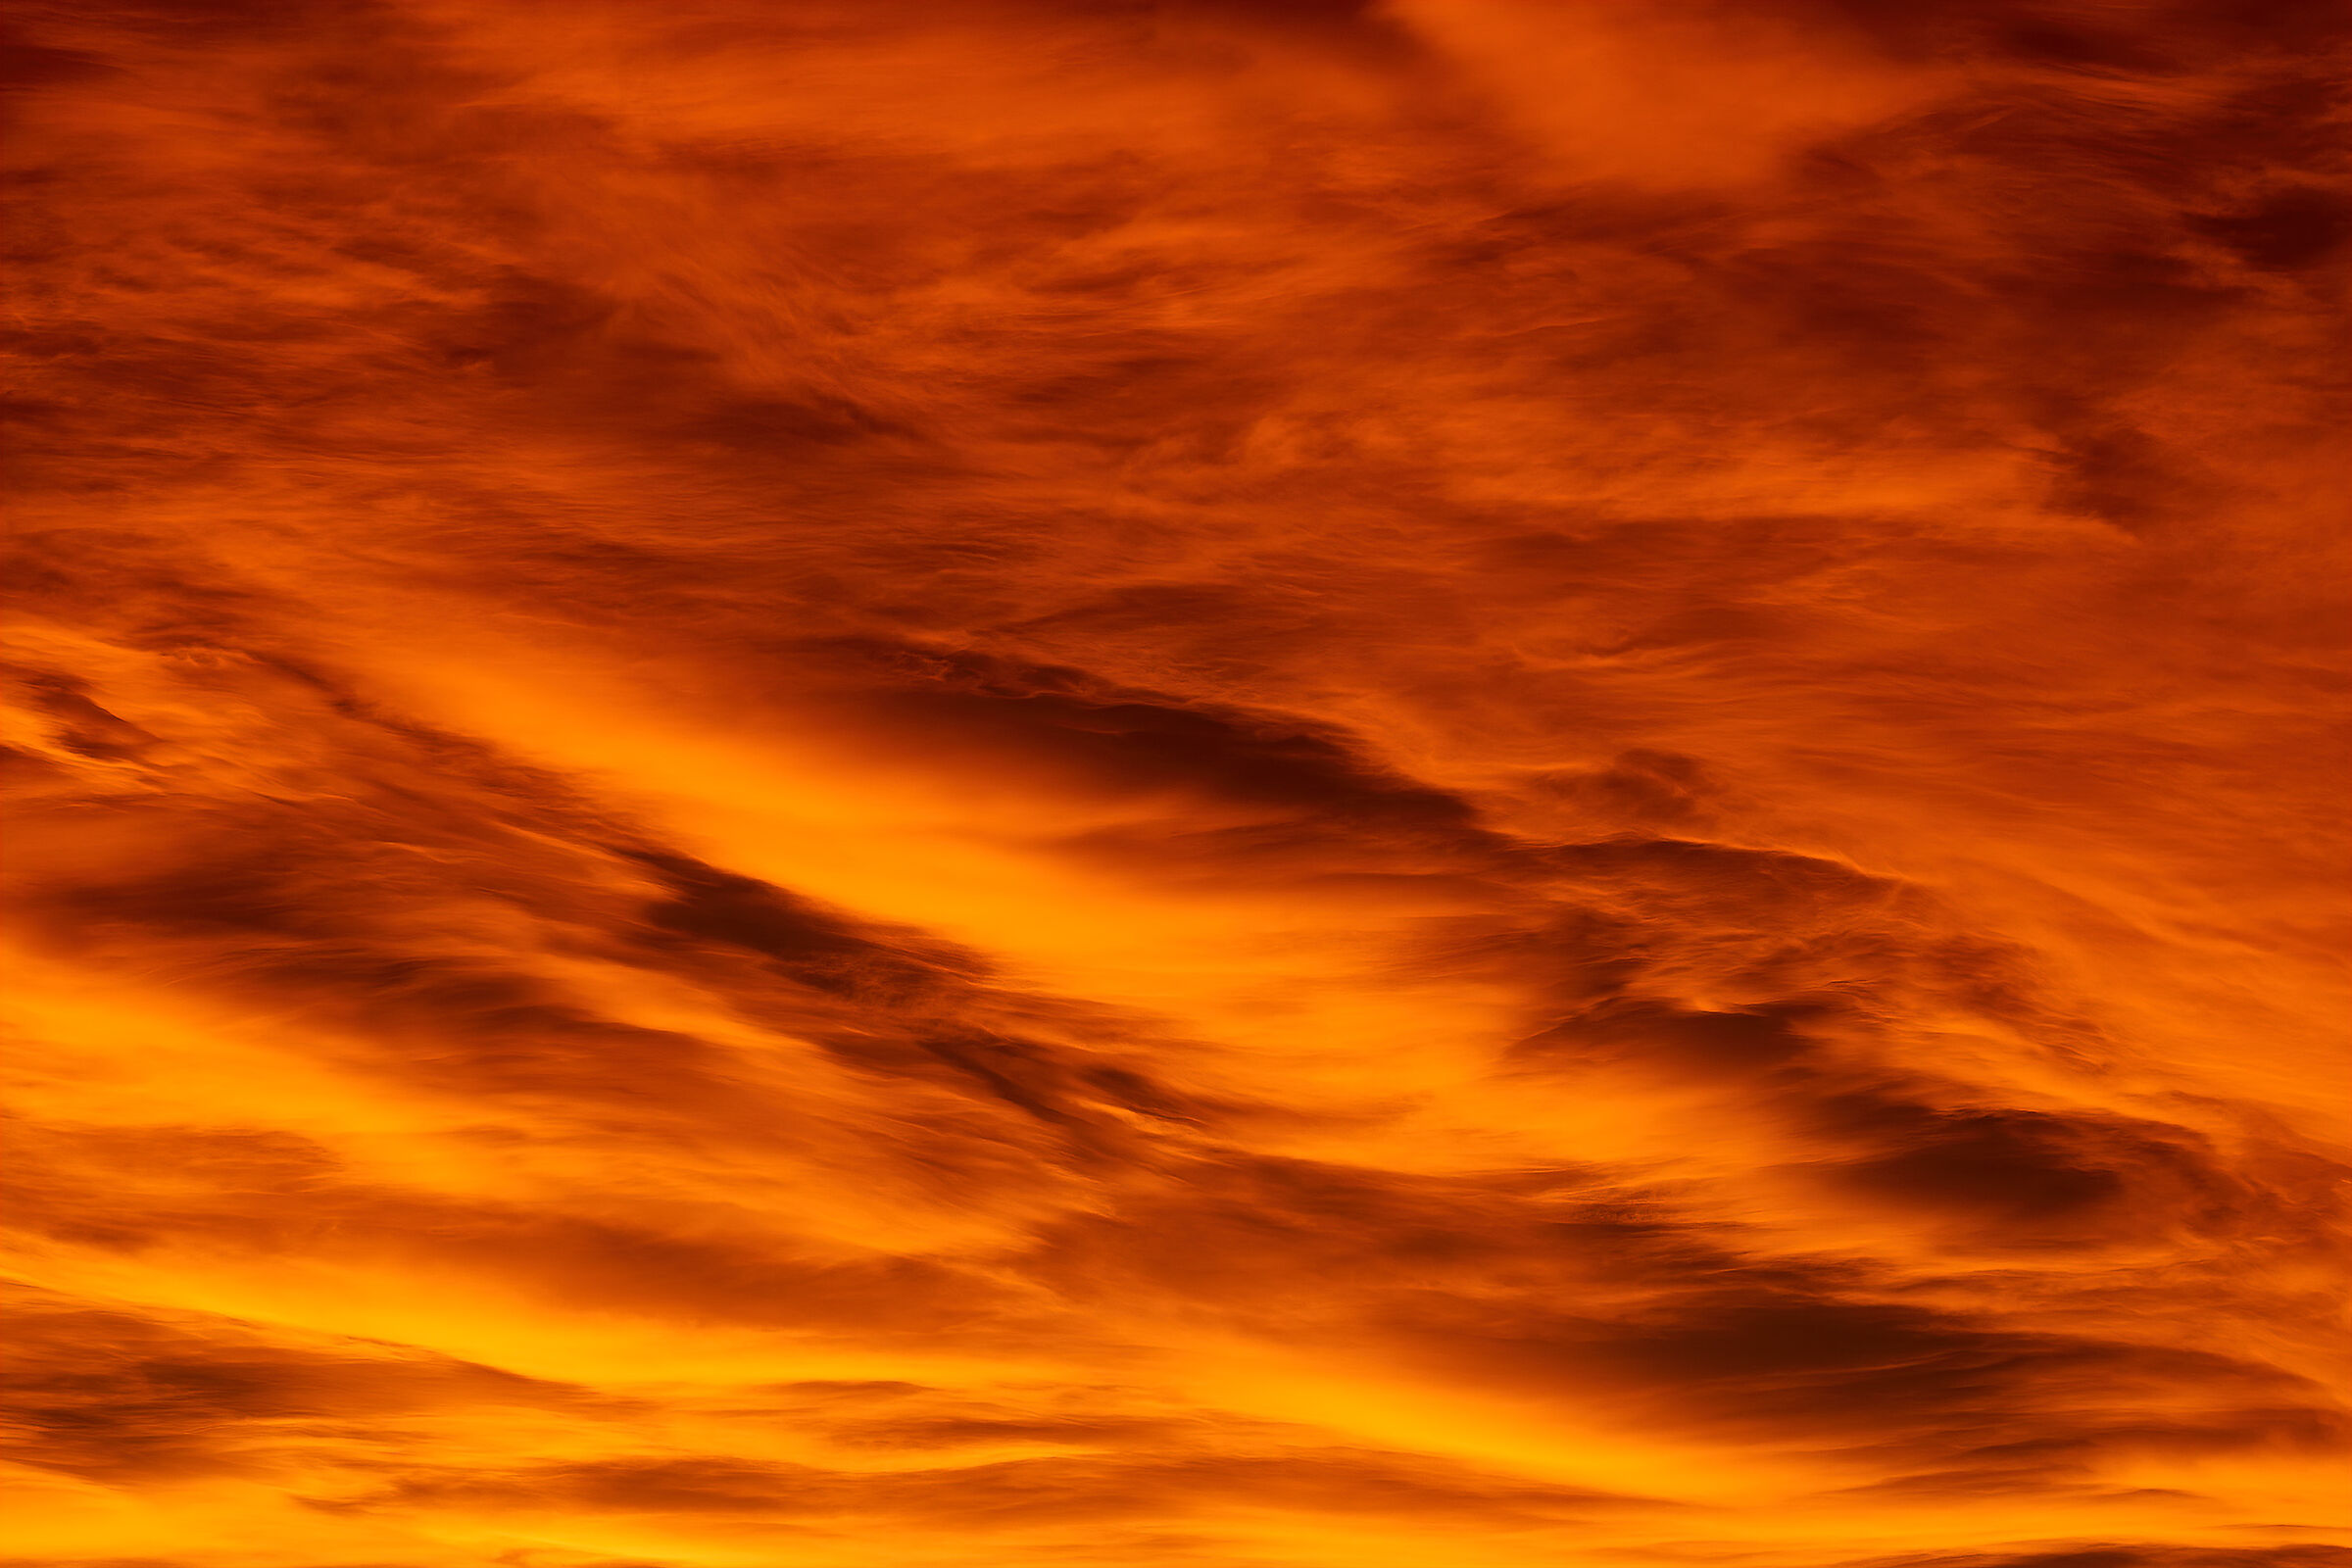 River of lava or clouds at sunset?...